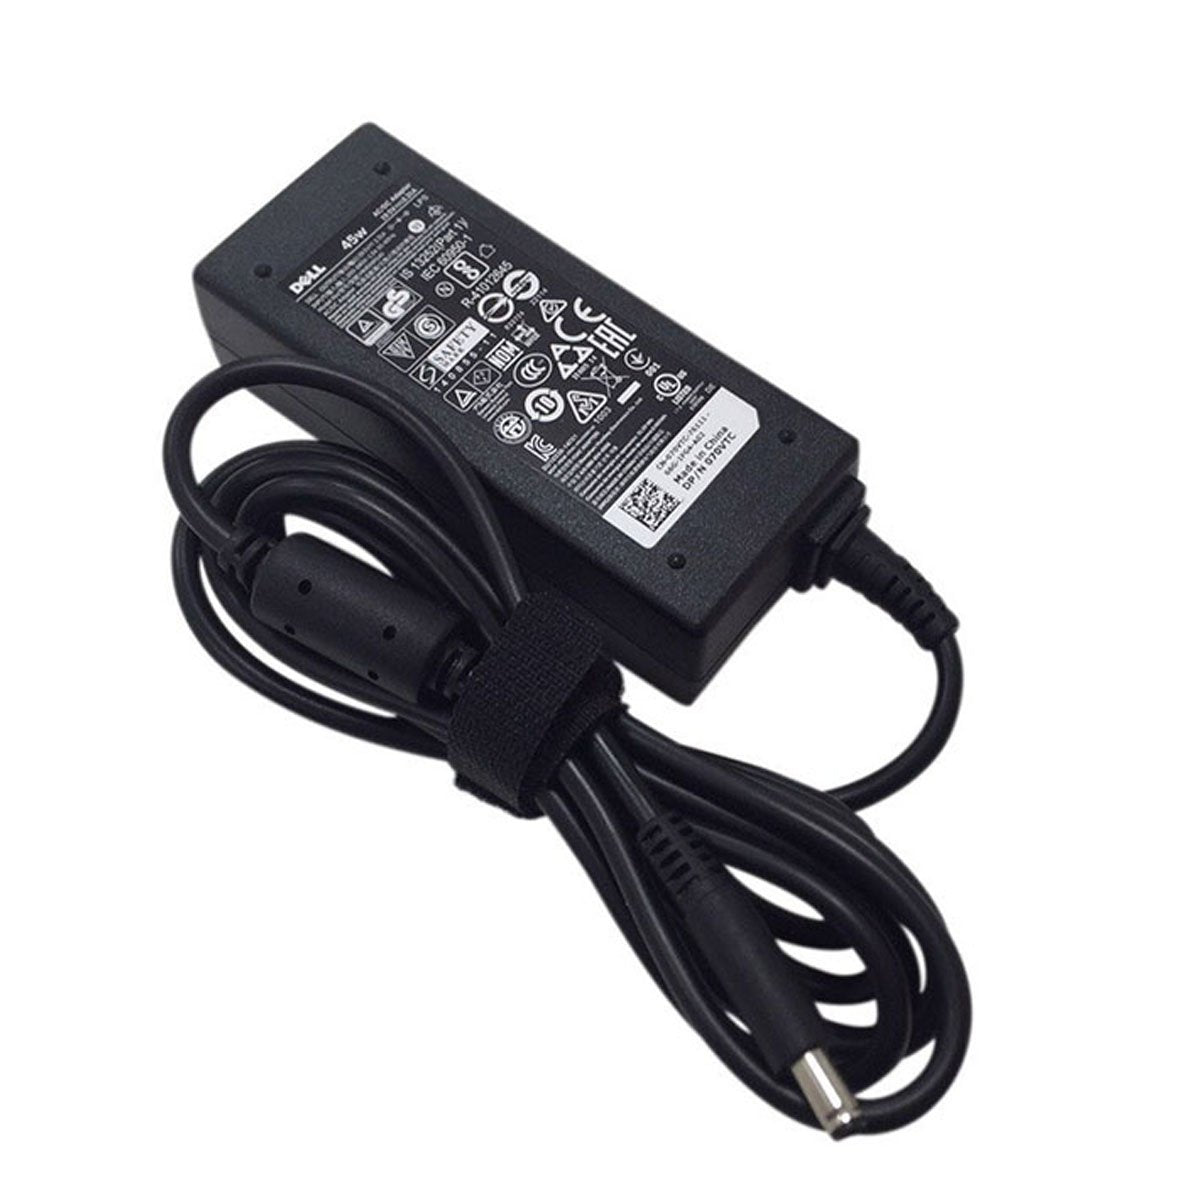 Dell Inspiron 17 5758 Original 45W Laptop Charger Adapter With Power Cord 19.5V 4.5mm Pin